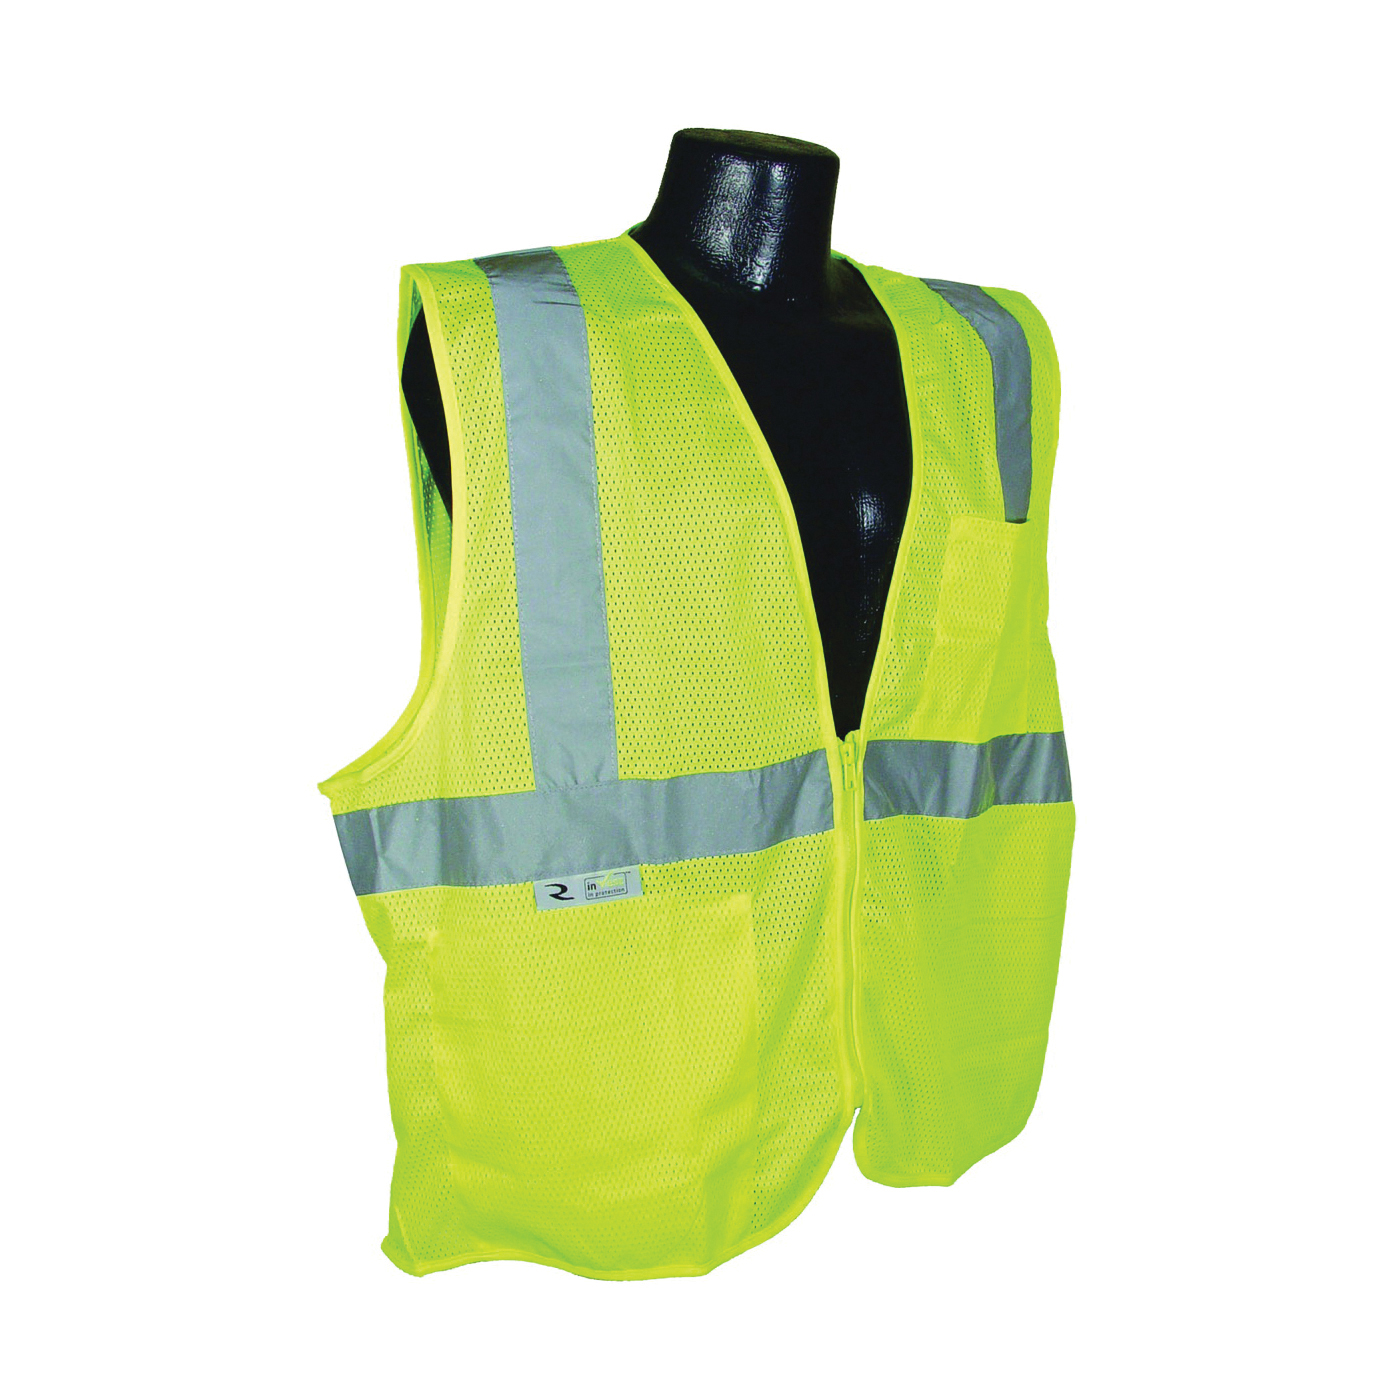 SV2ZGM-XL Economical Safety Vest, XL, Unisex, Fits to Chest Size: 28 in, Polyester, Green/Silver